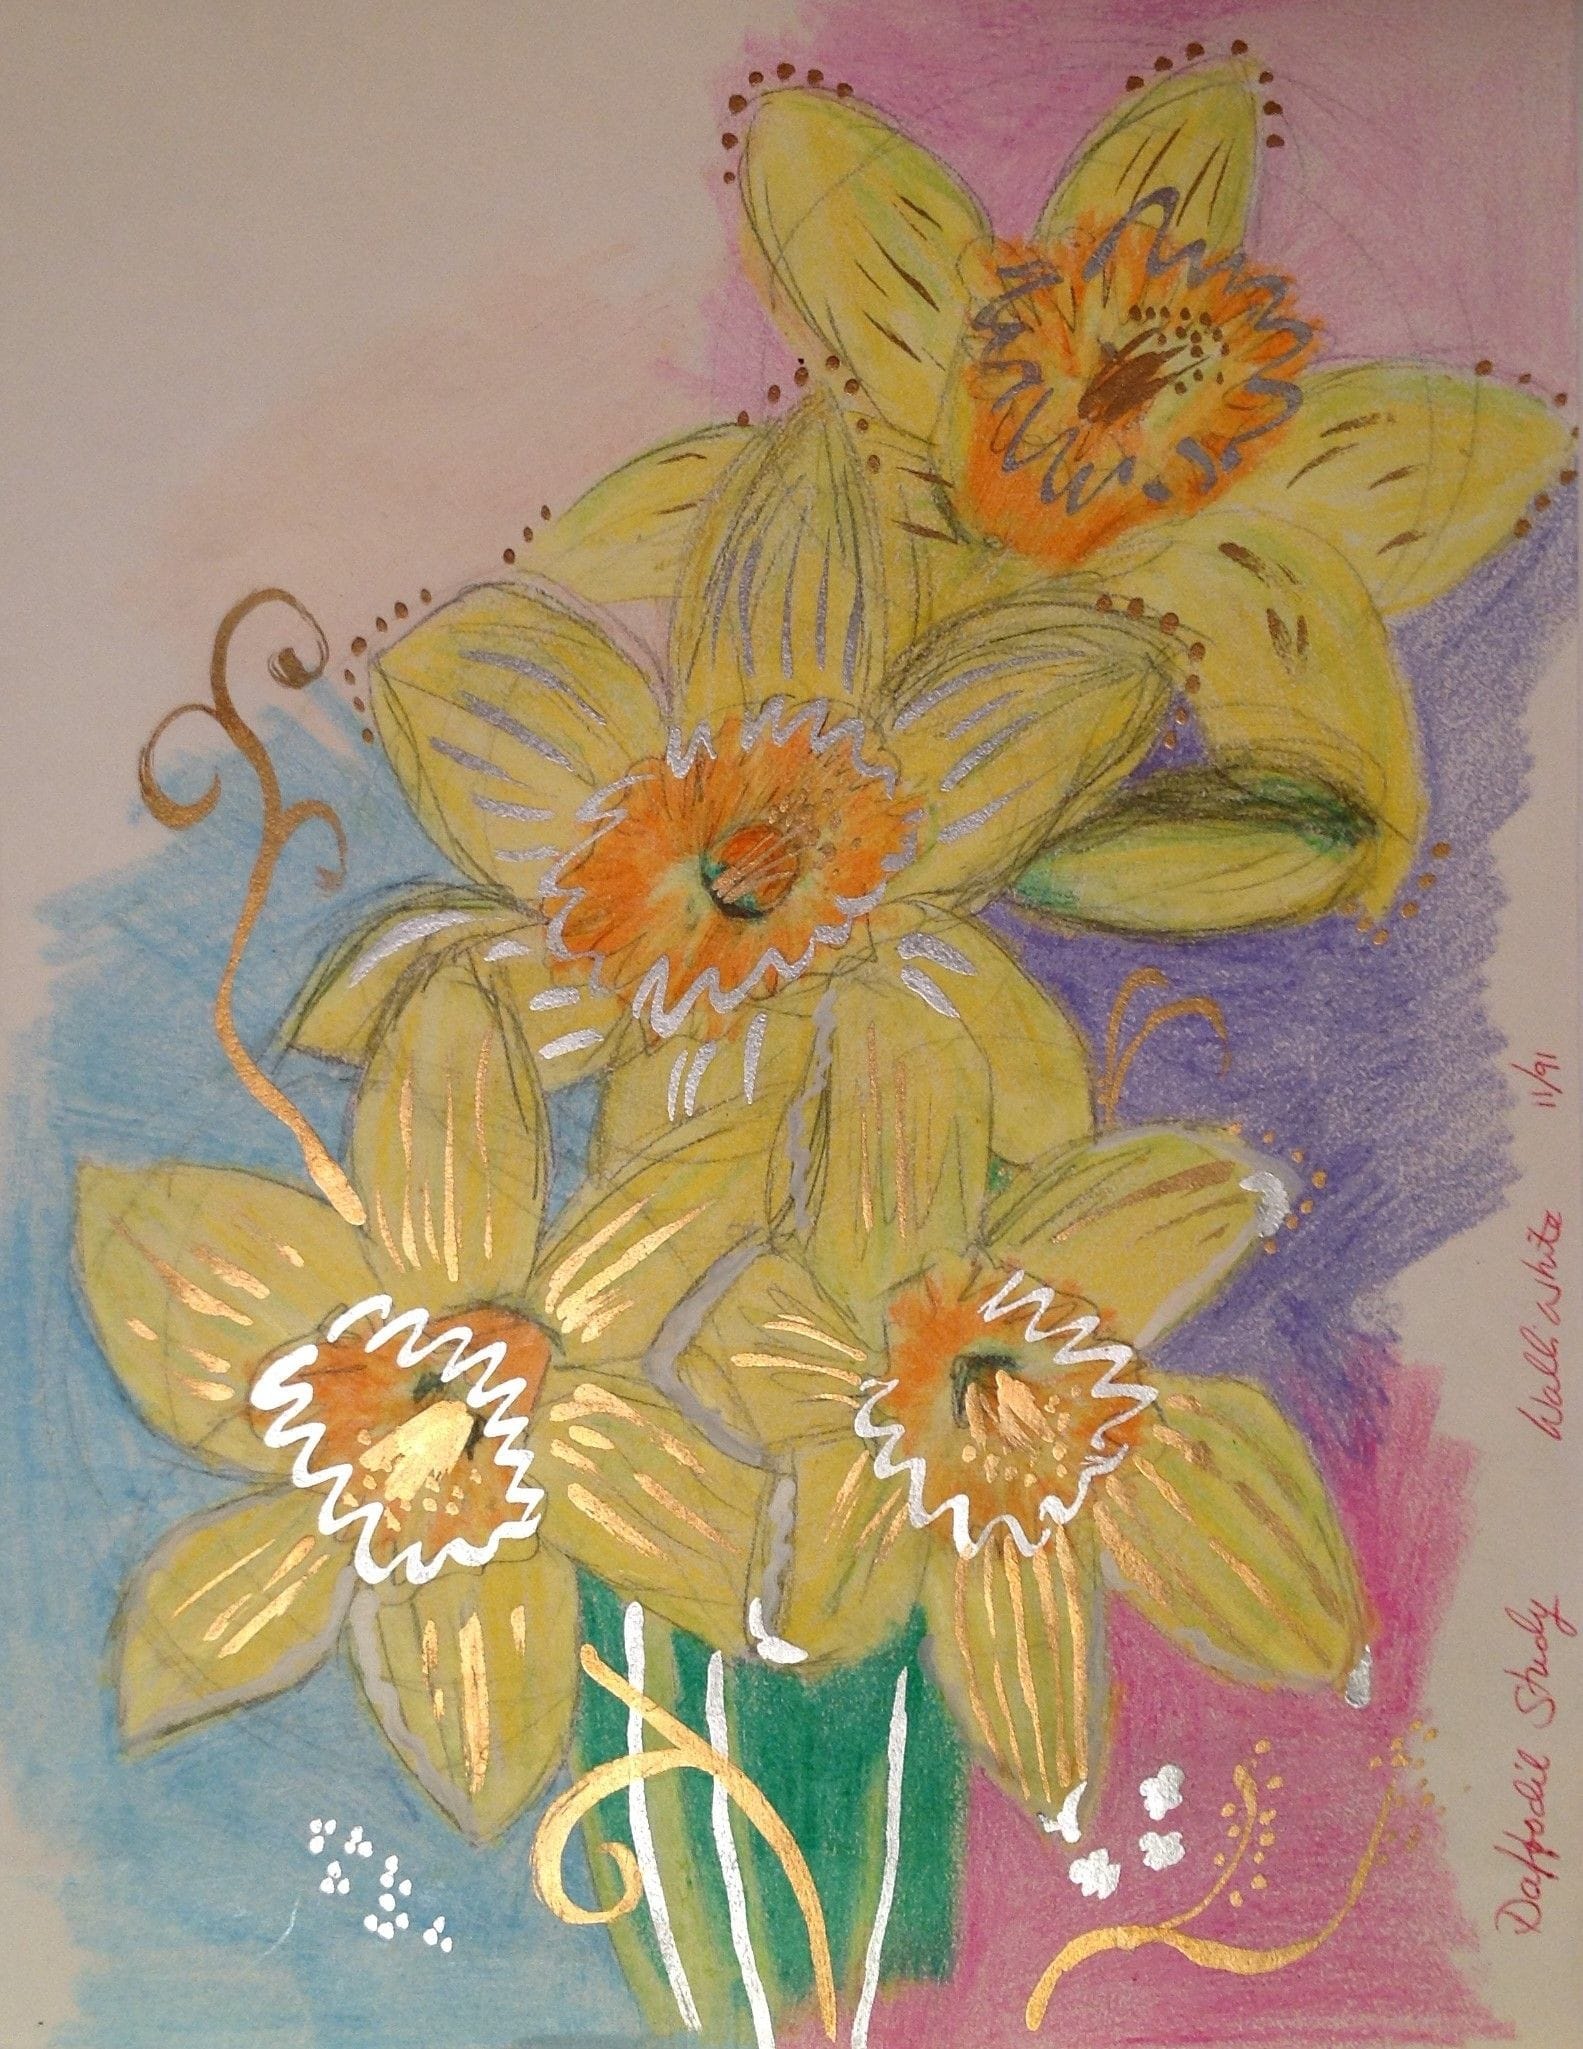 Daffodil Study, 1991
Crayon and Gold and Silver Paint on Paper
8.5"W x 11"H, Walli White, artist